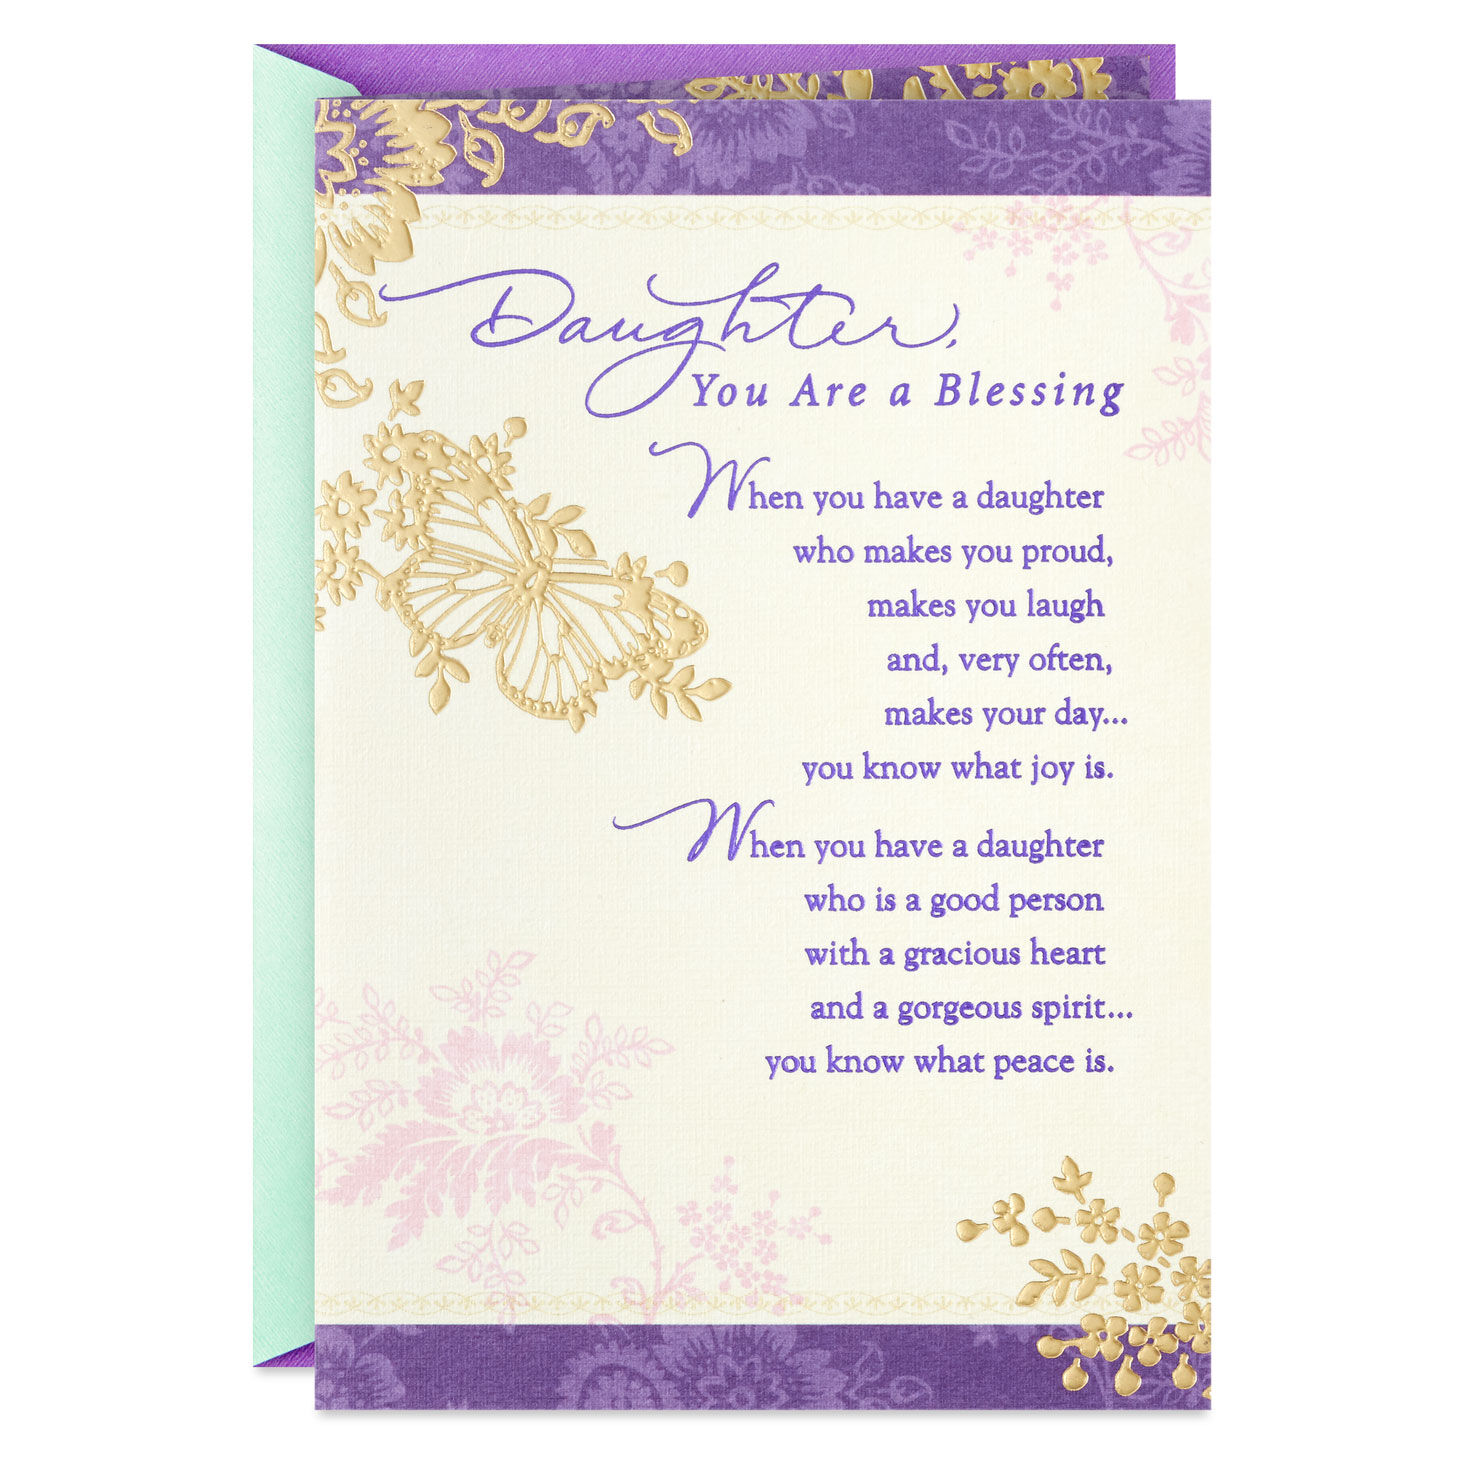 Godfather Blue Dots Birthday Card text foiled in shiny gold